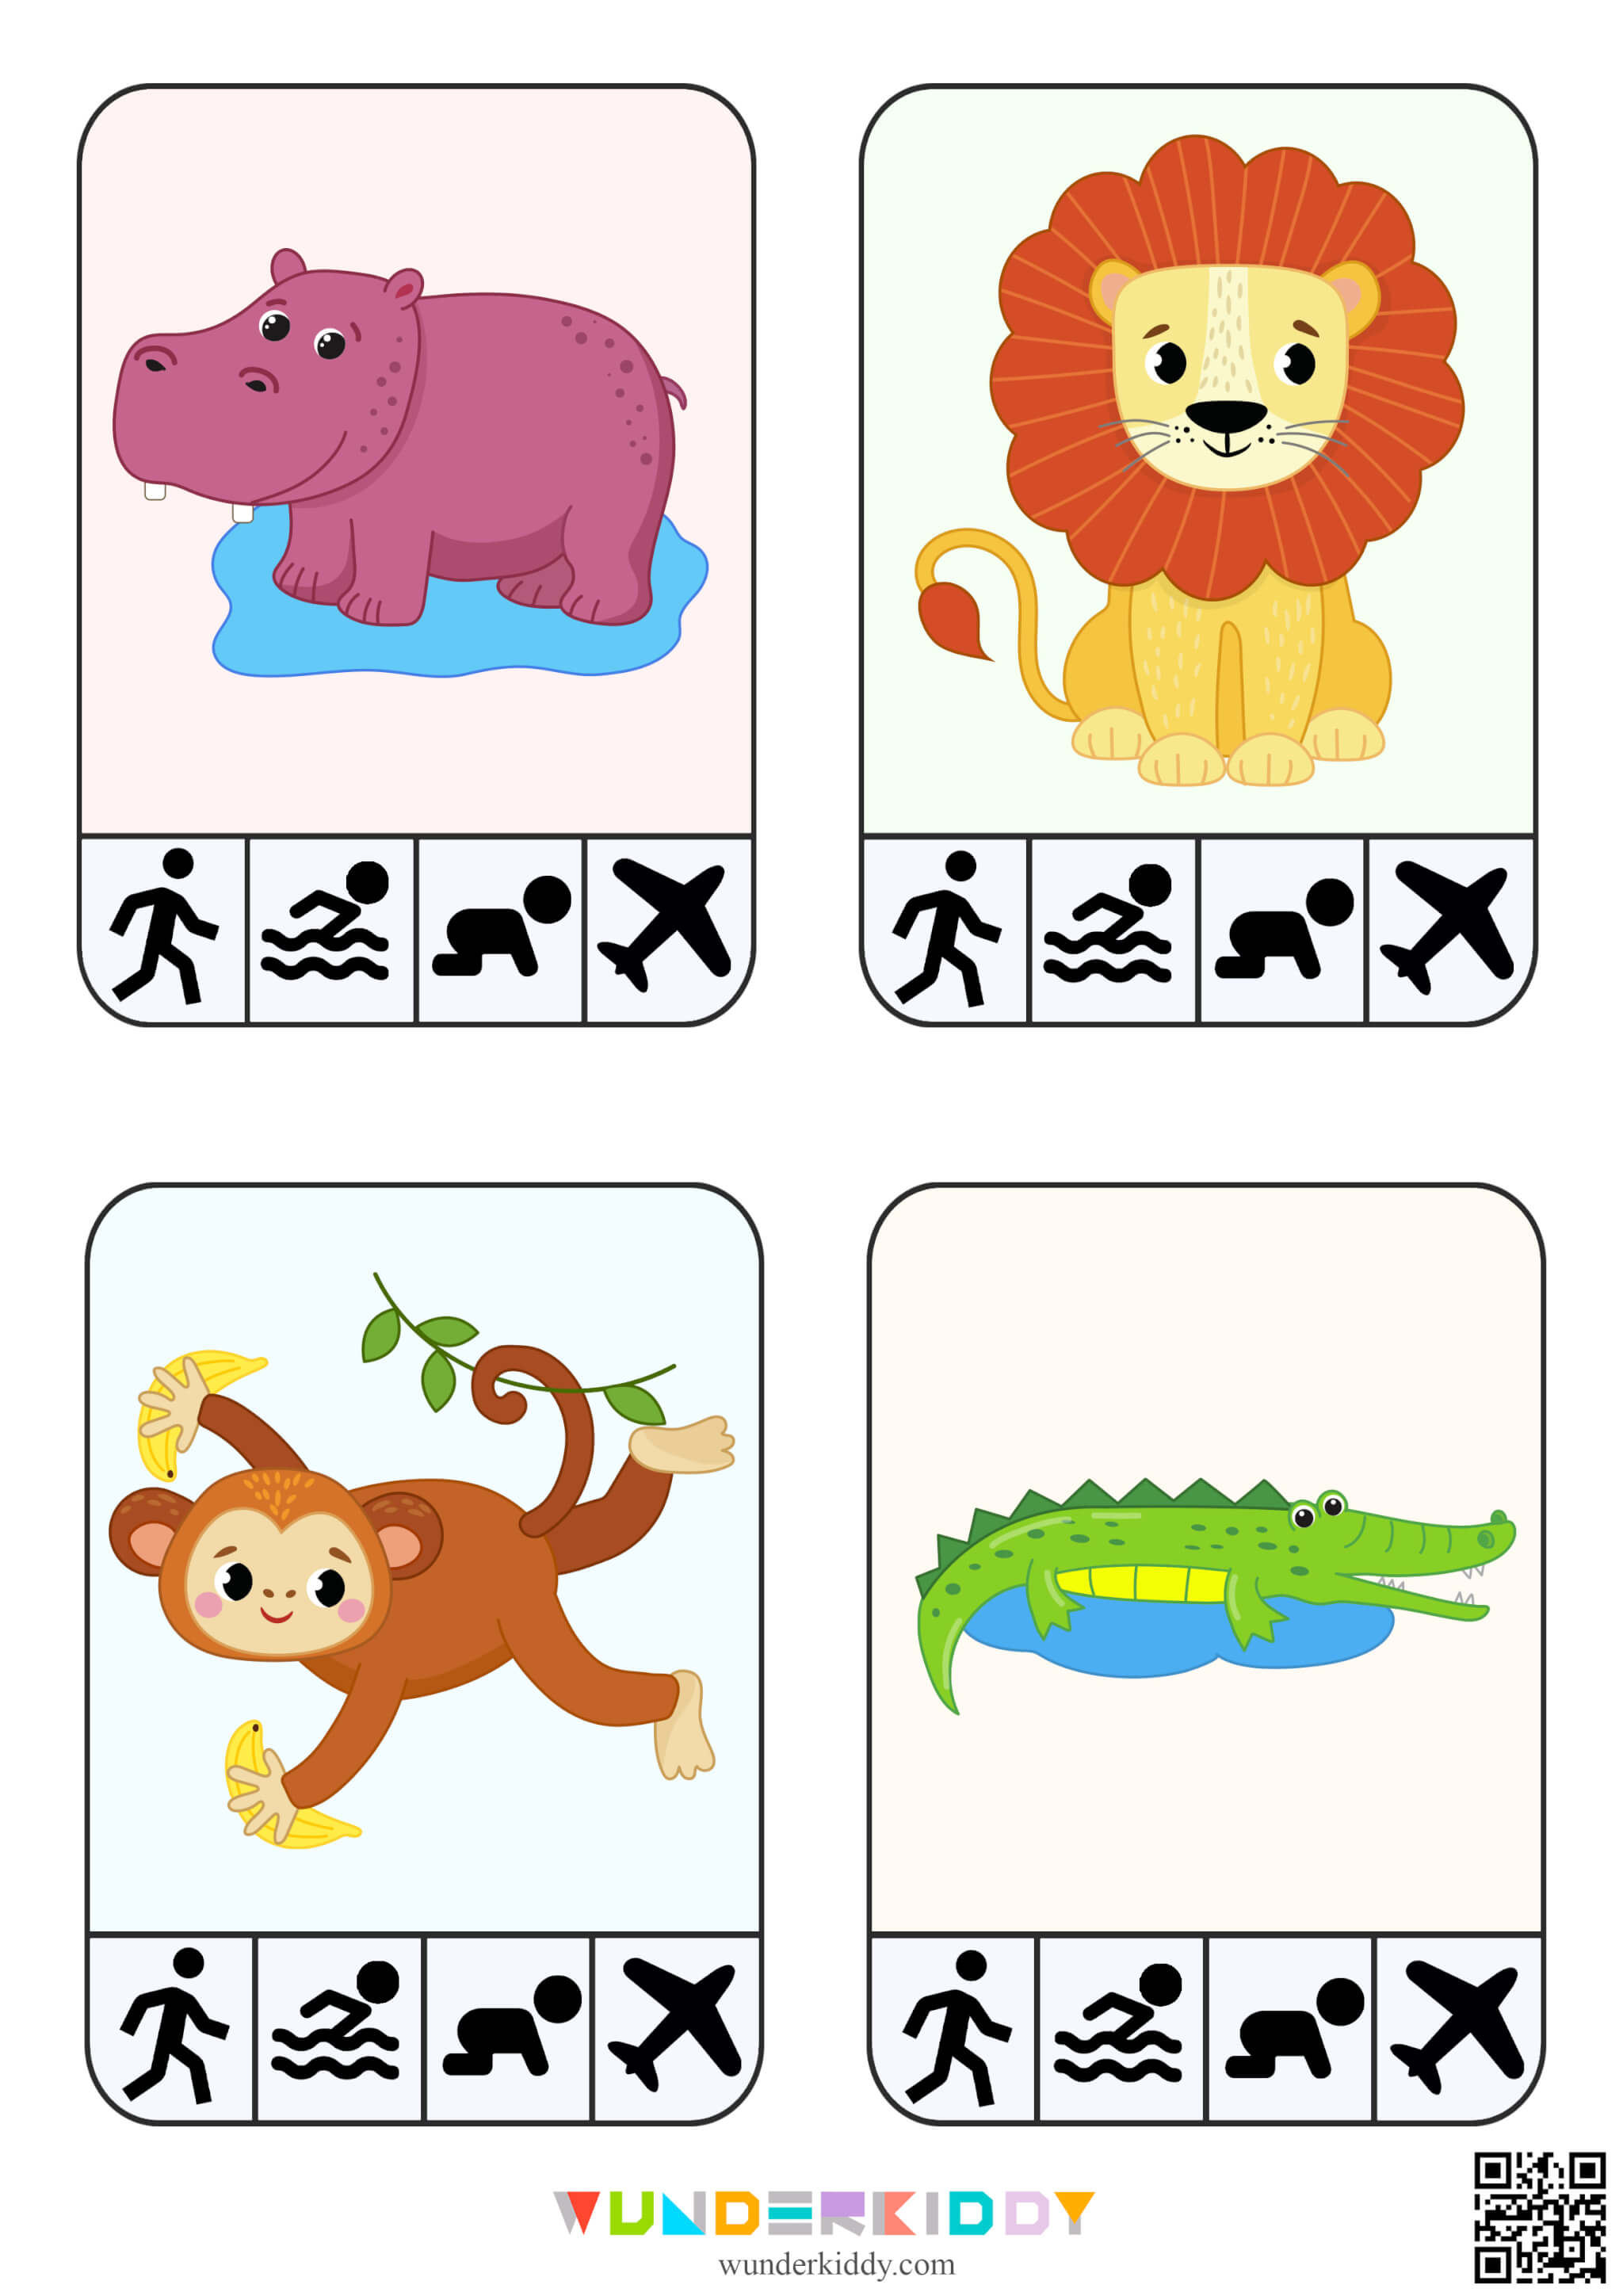 Animal Movements Activity for Kids - Image 3